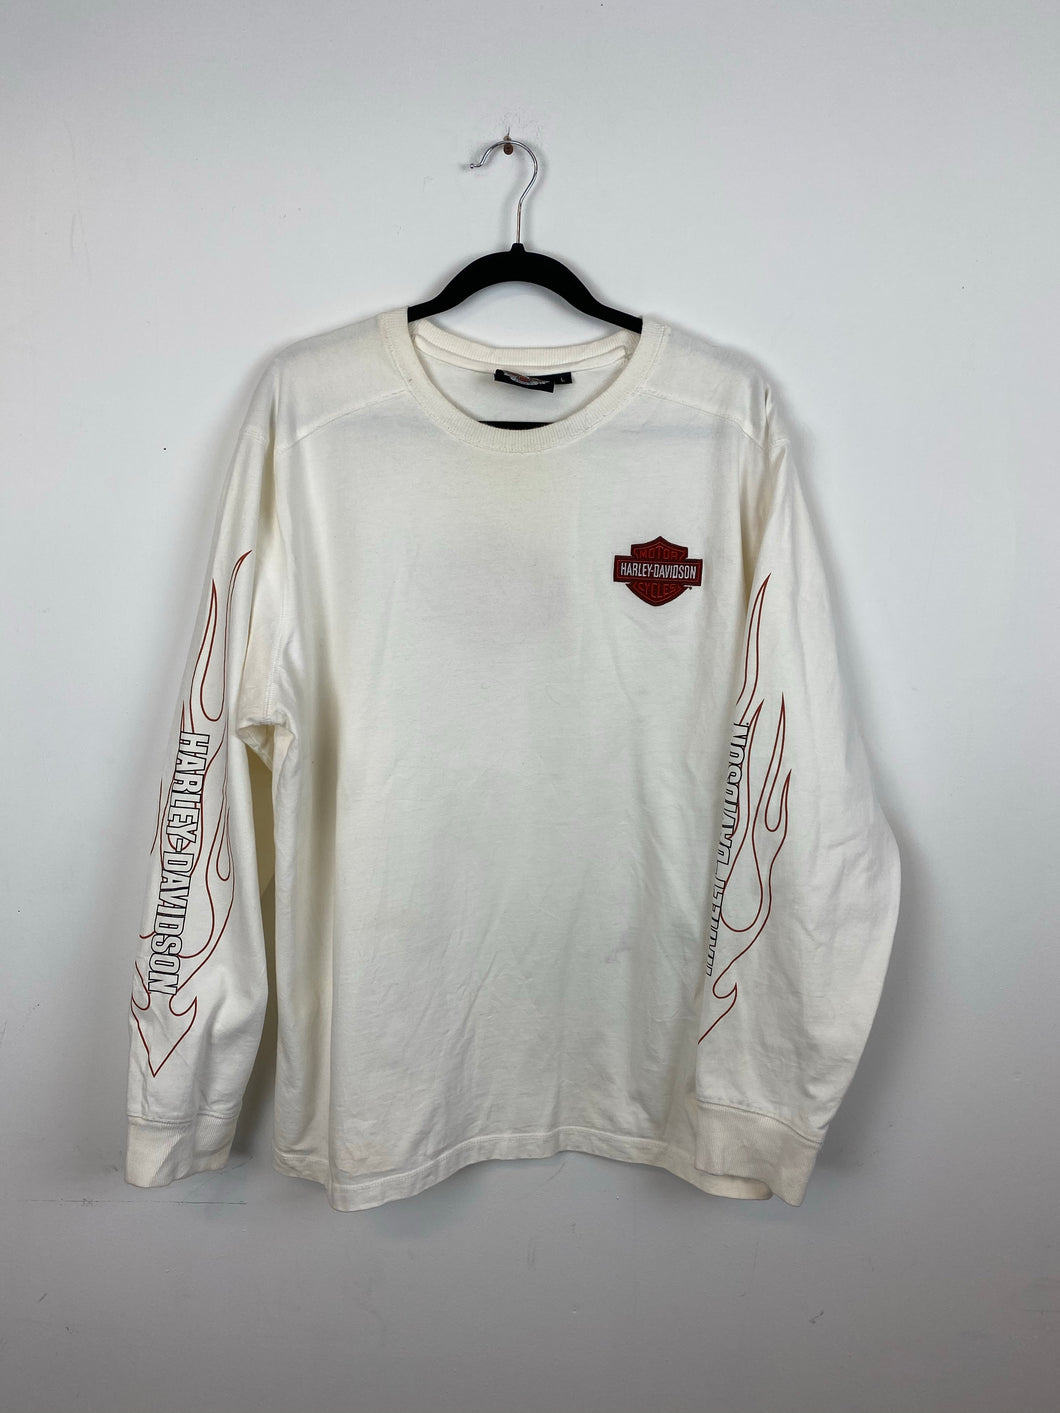 Front and back embroidered Harley Davidson longsleeve